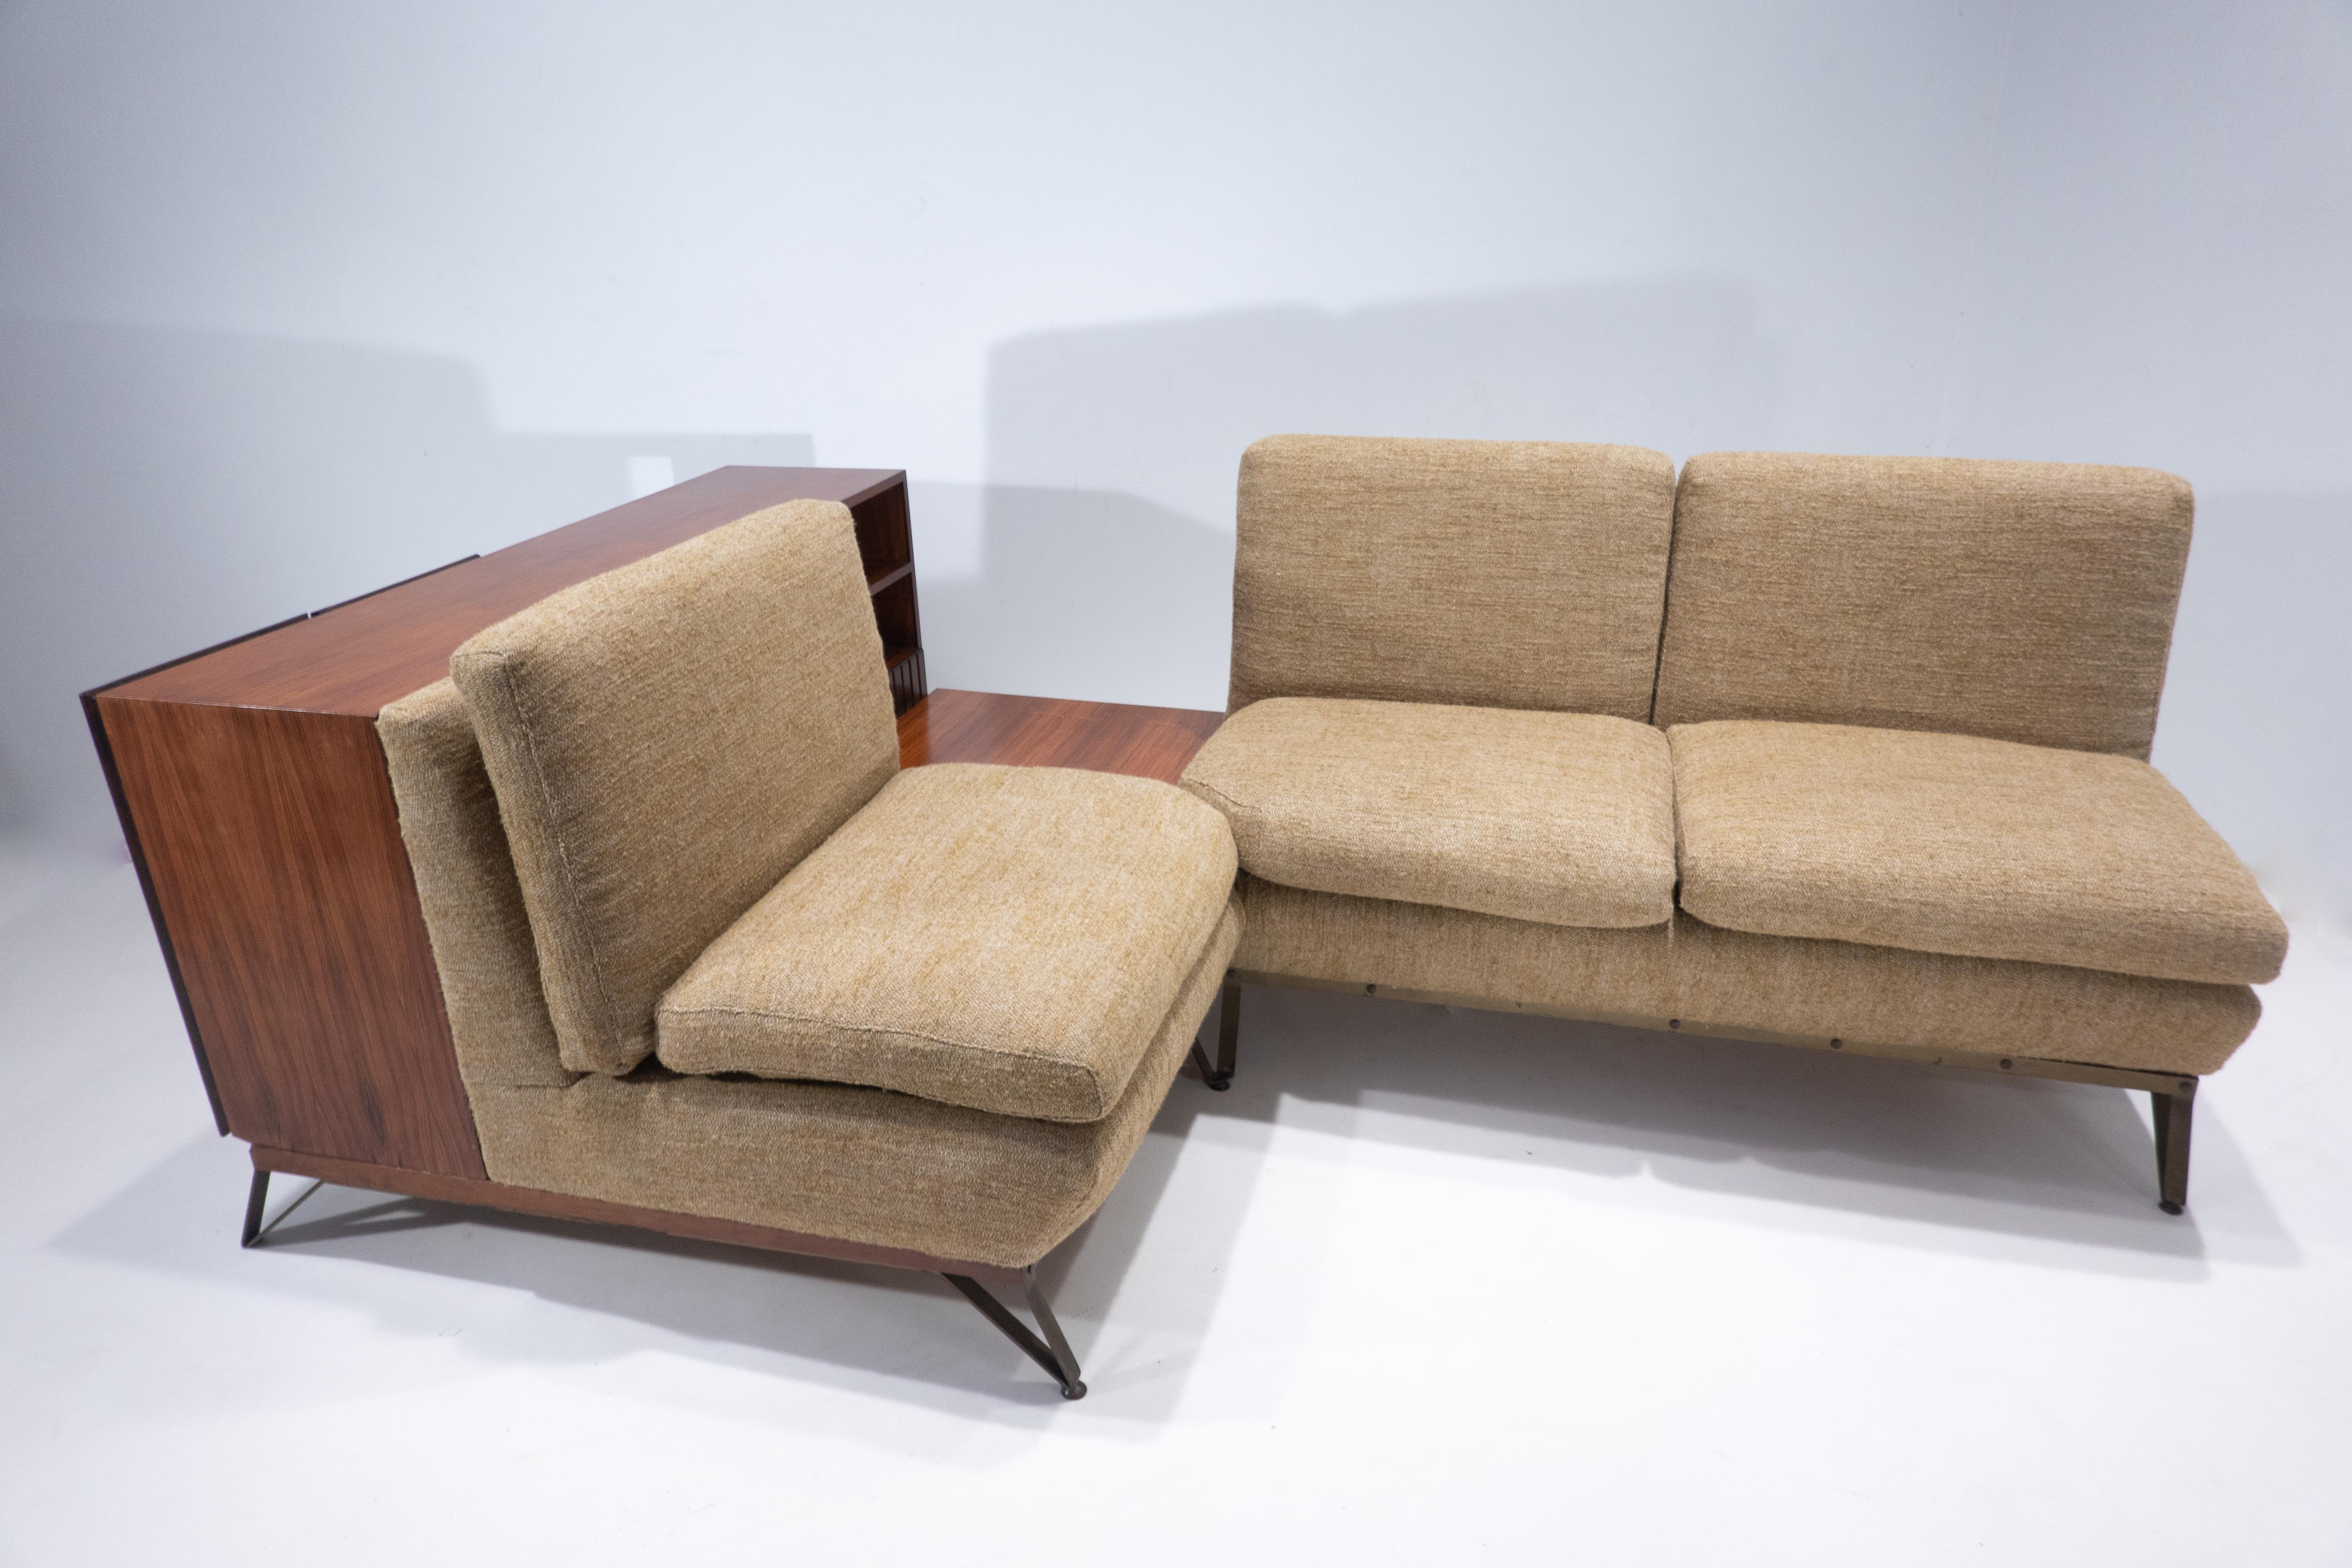 Mid-20th Century Mid-Century Modern Italian Sofa with Built-in Sideboard, Italy, 1960s For Sale